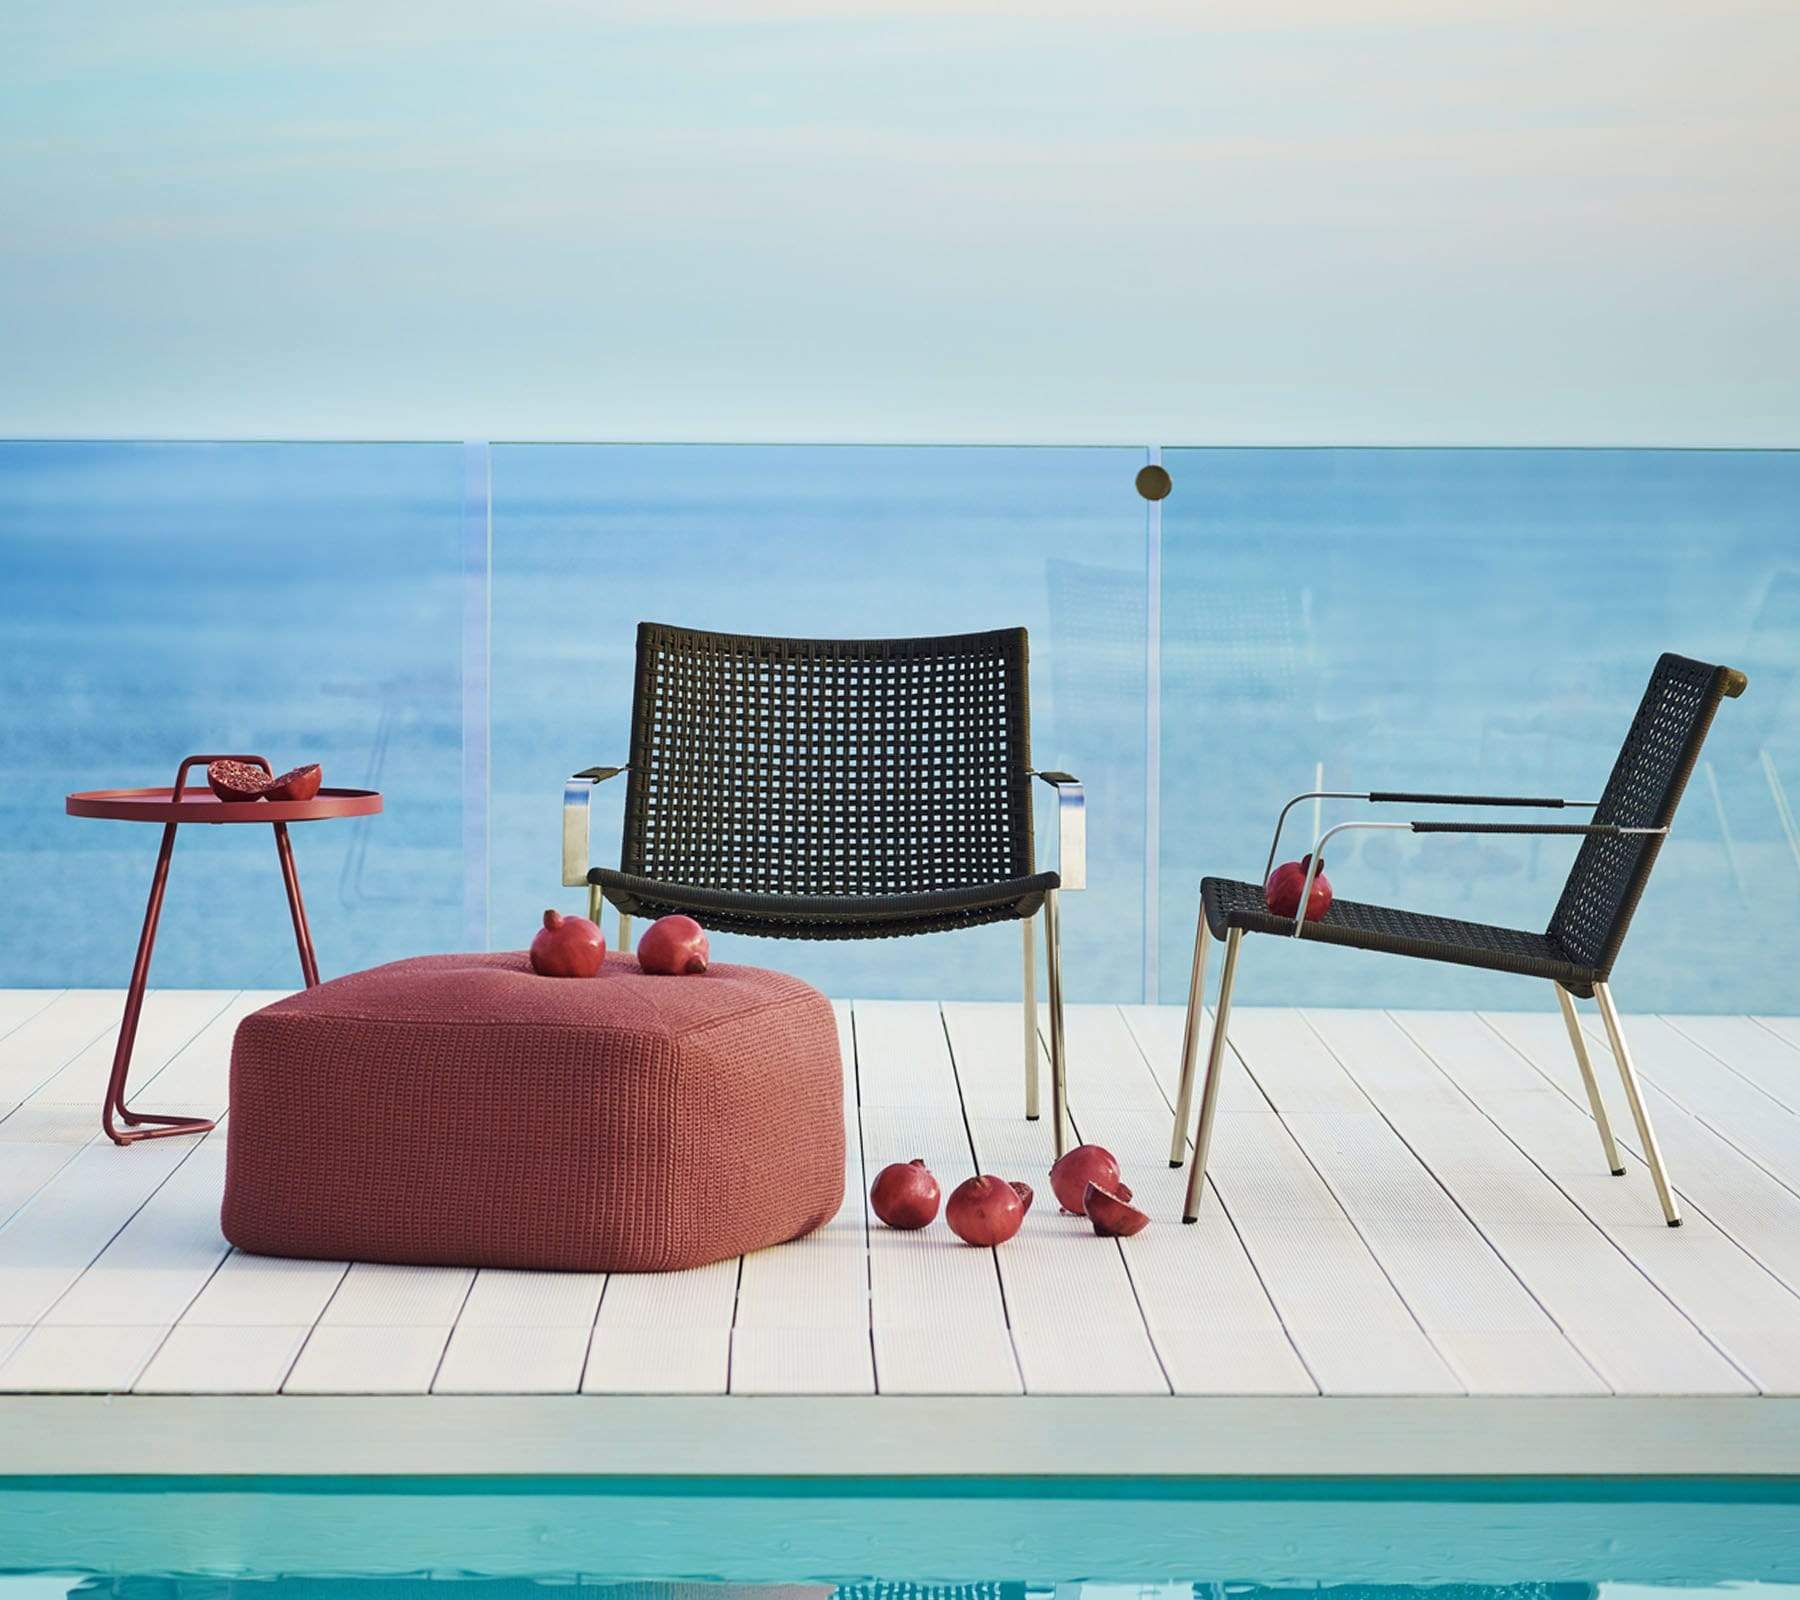 Boxhill's Straw dark grey outdoor lounge chair stainless steel frame with red round side table and red footstool placed on poolside